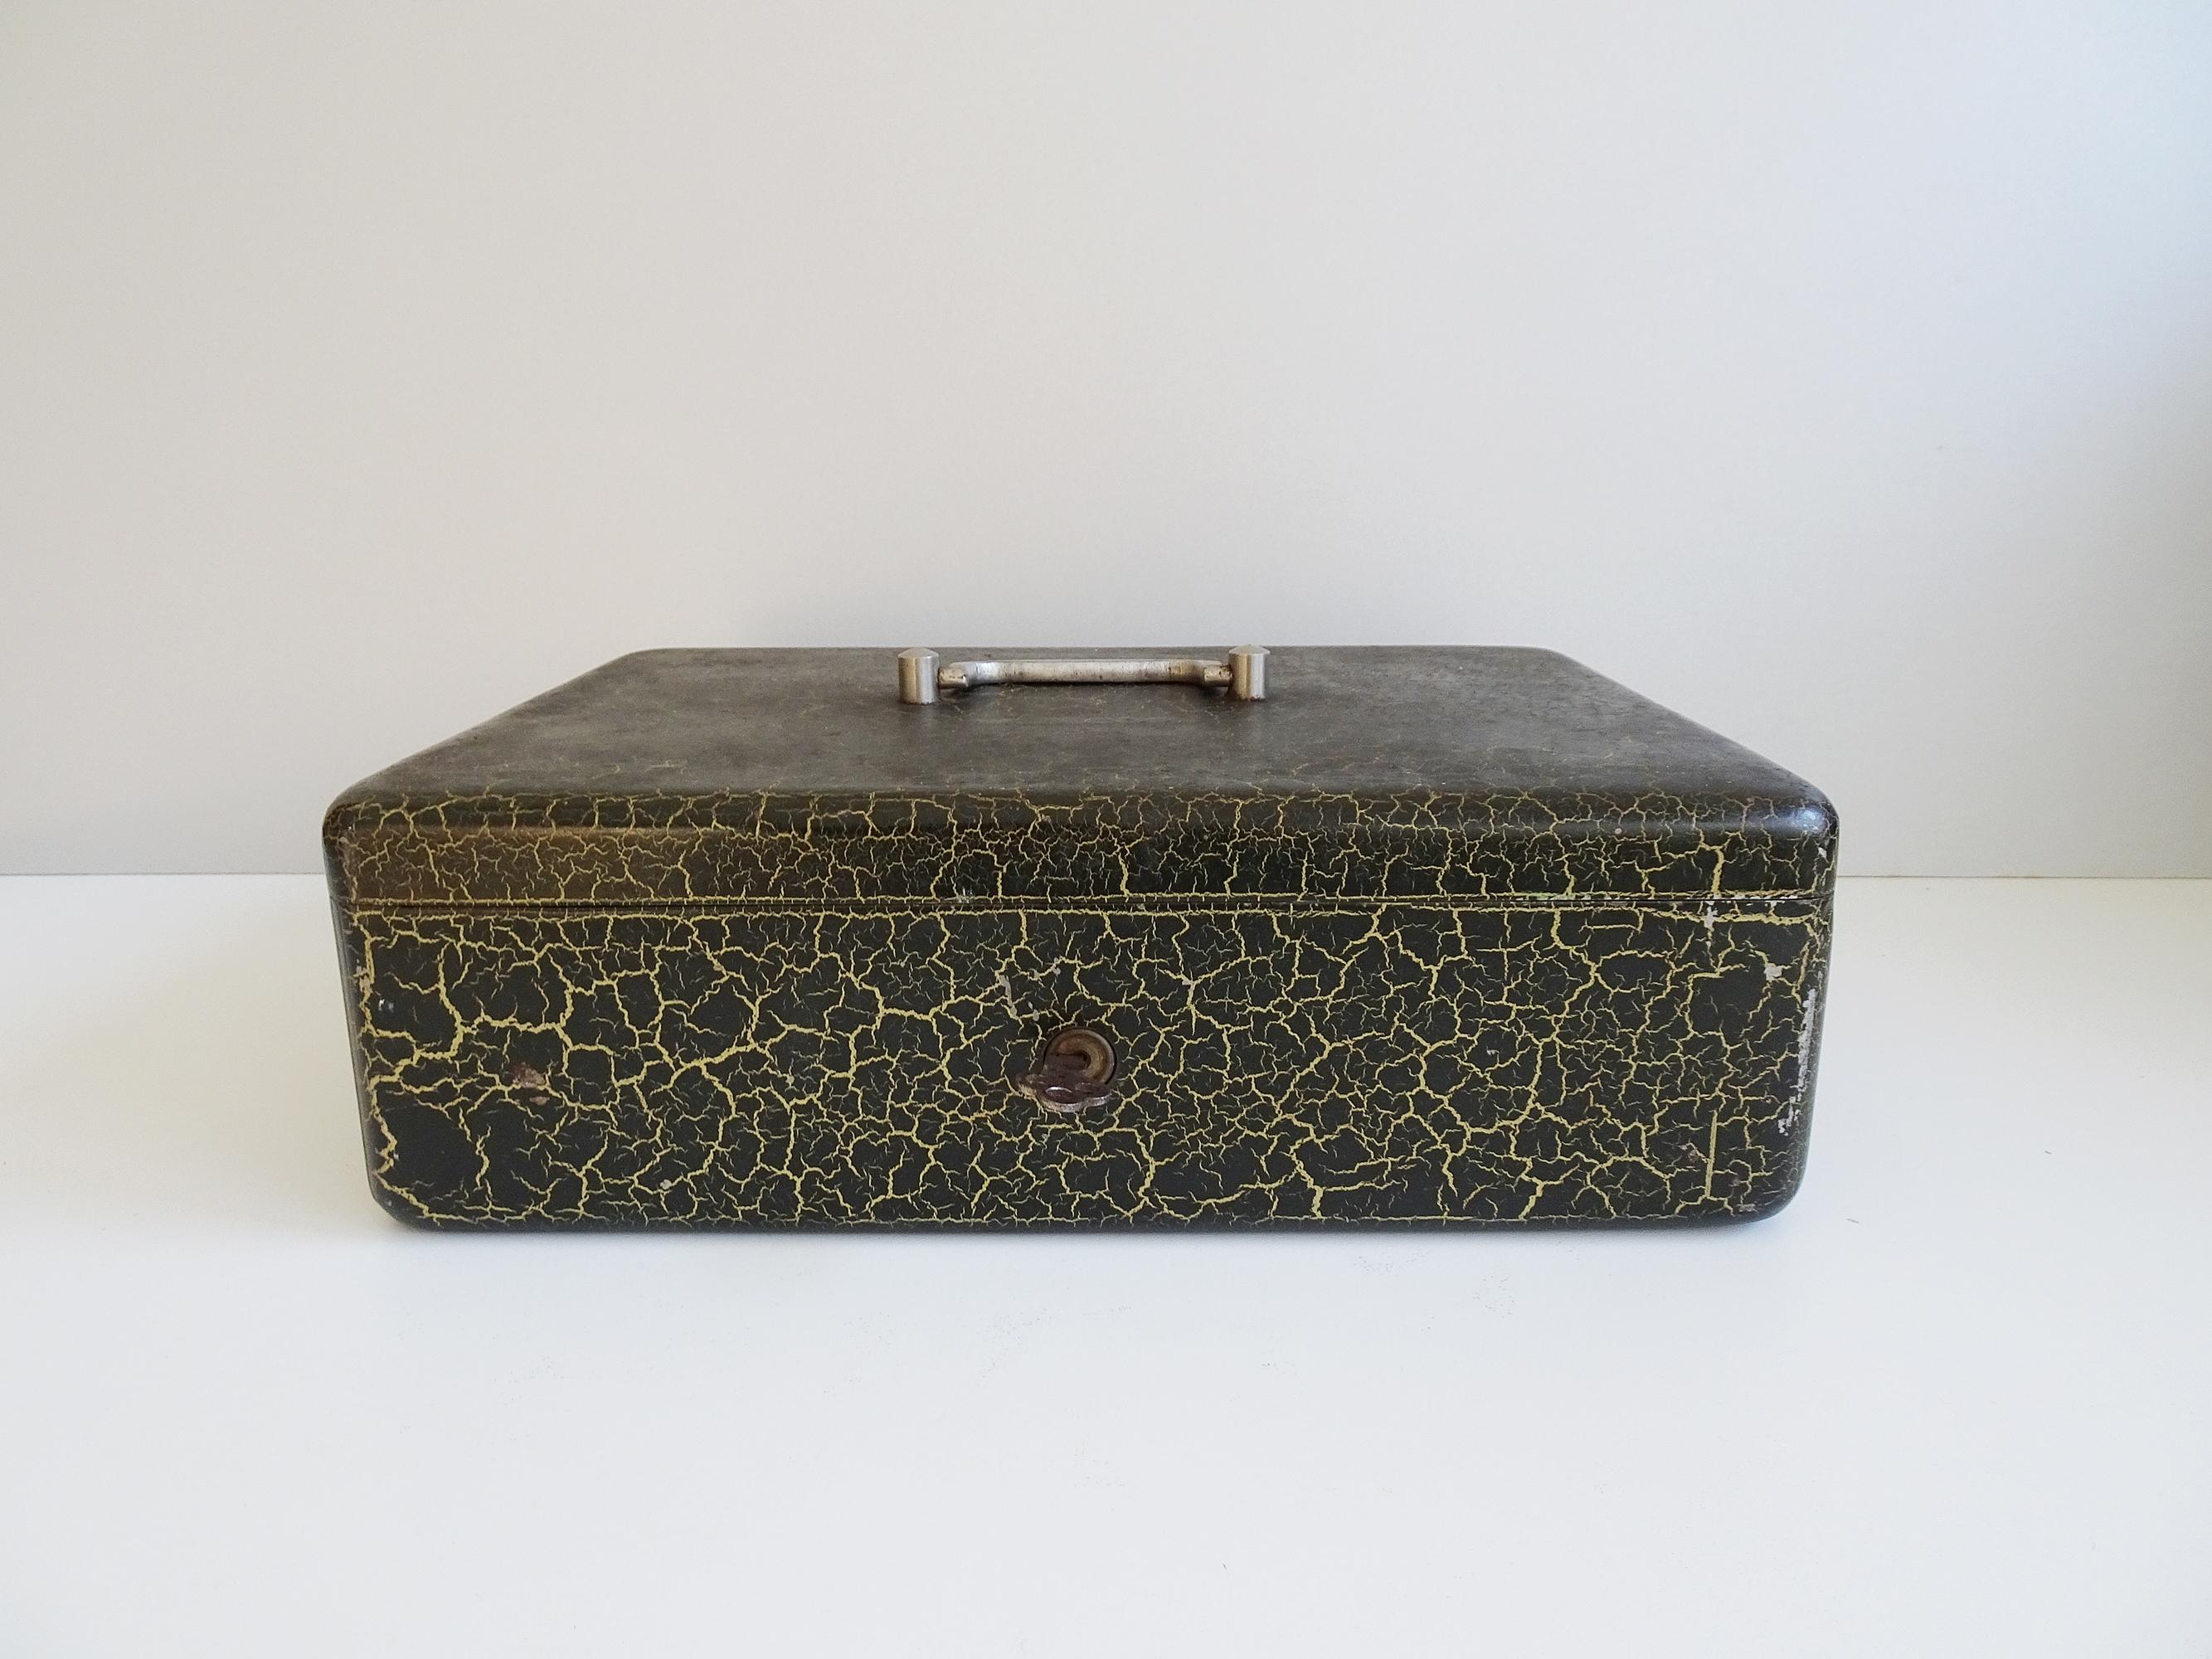 French steel box from the 1930s. Green lacquered case with golden craquelé pattern. The cash register has a classic handle and a key to lock. Painted green in the interior and a sheet metal insert for coins.

A great piece from Art Deco with